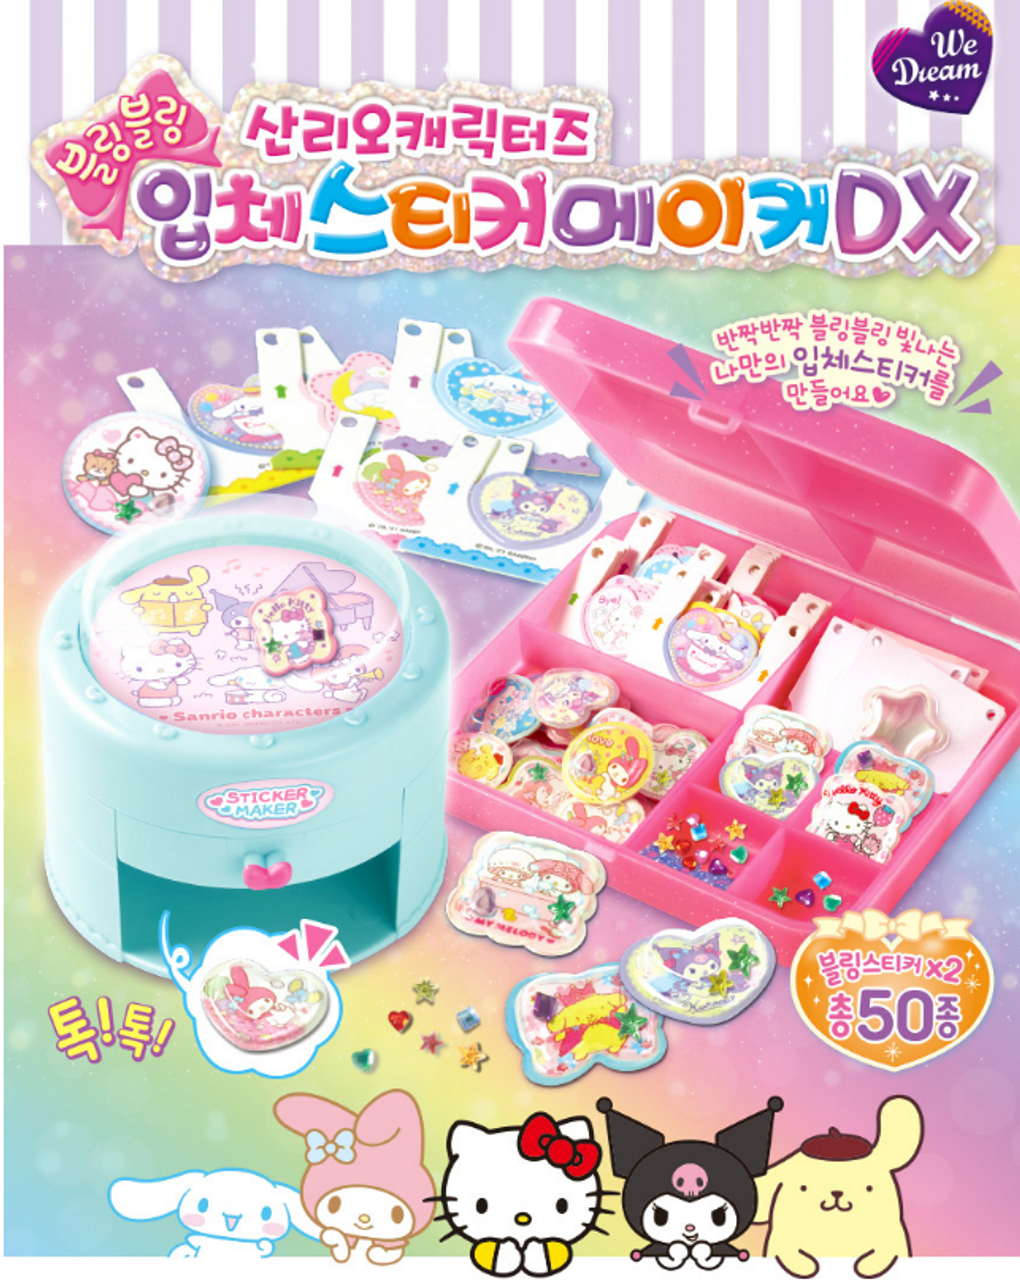 Sanrio Characters 3D Shape Sticker Maker DX Set Toy Hello Kitty